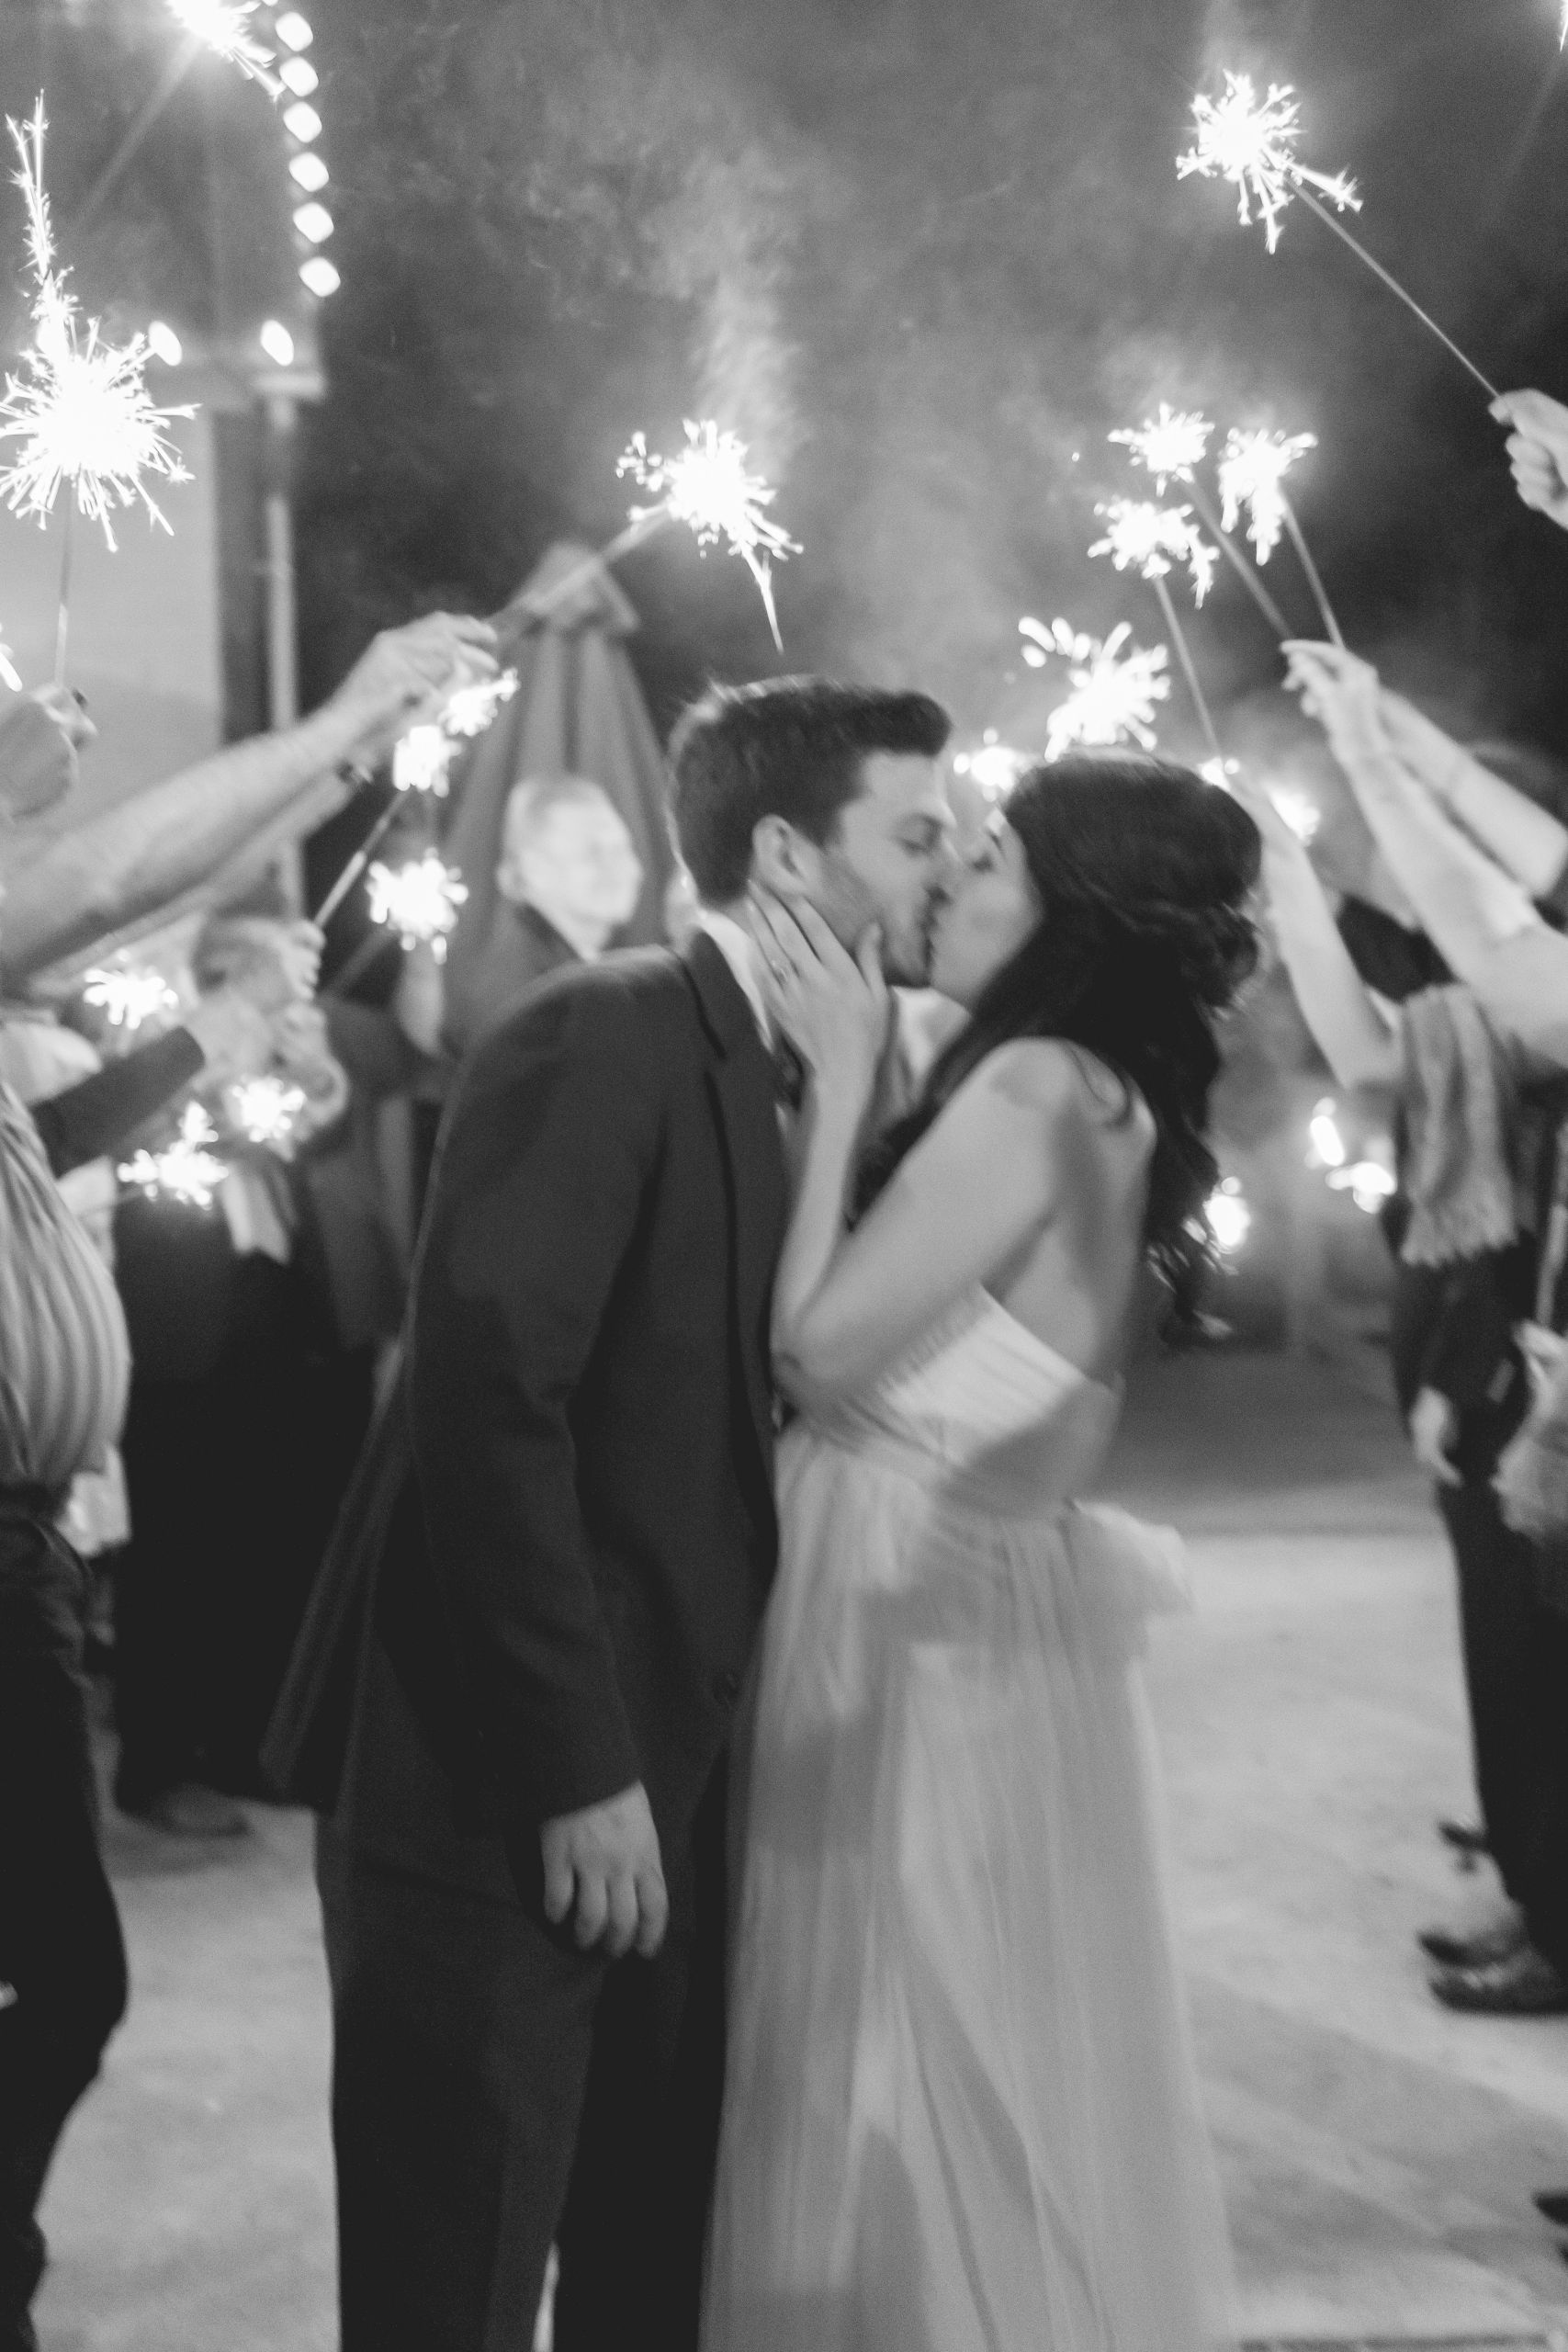 Wedding Sparklers For Sale
 Wedding Themes 2016 Sparklers For Sale